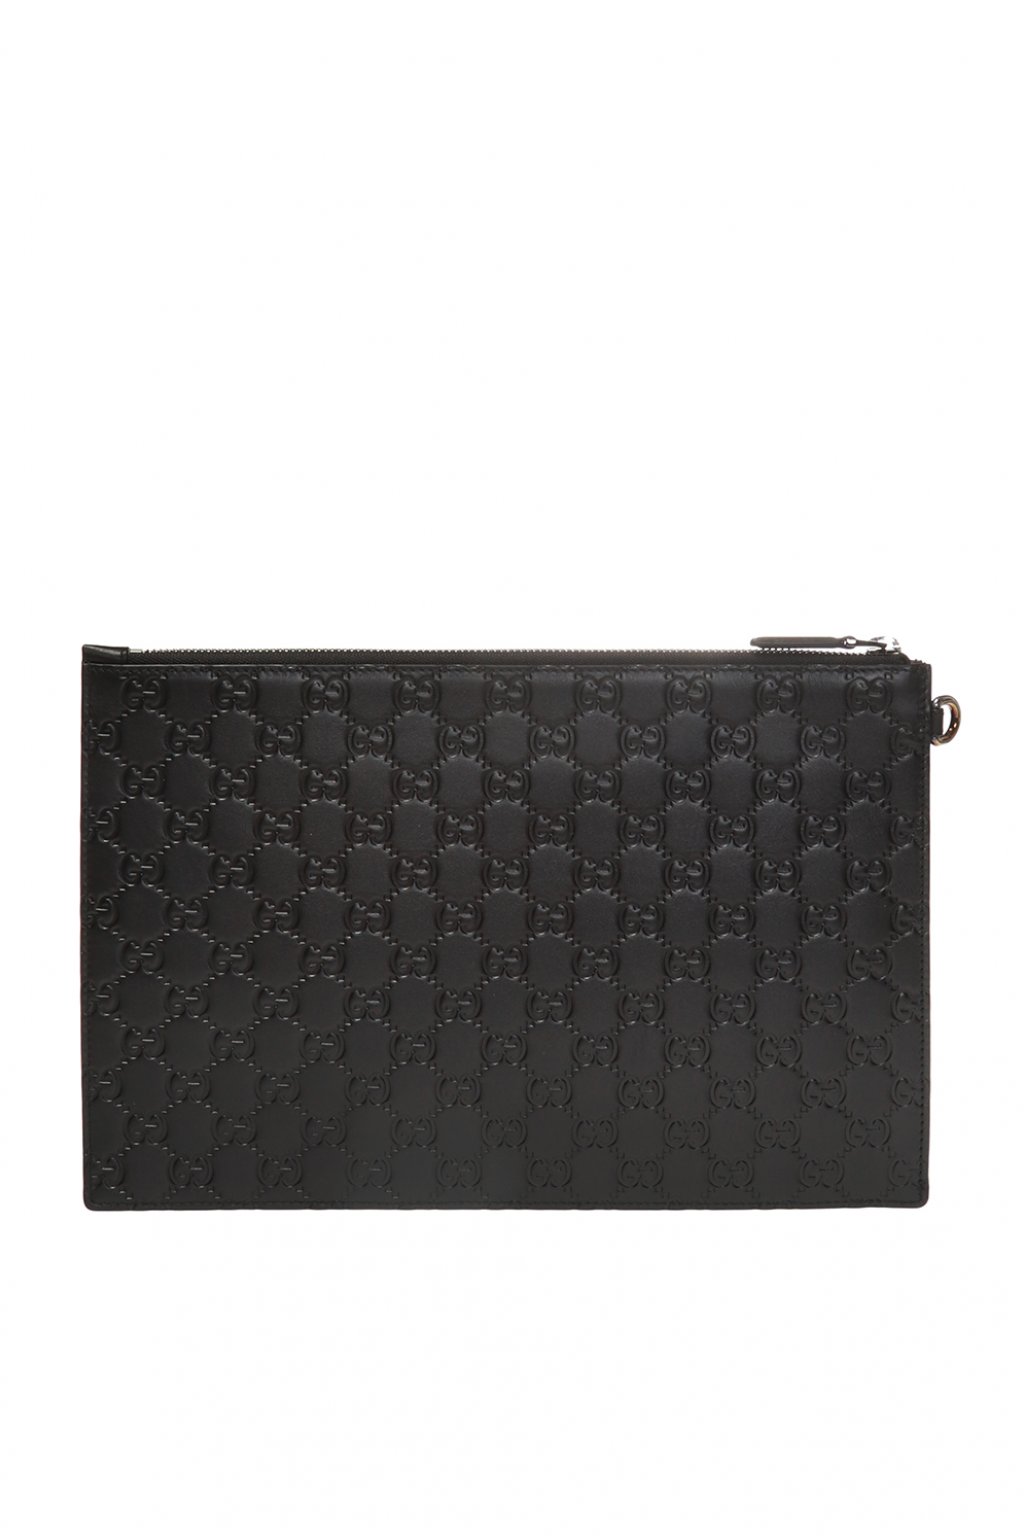 gucci embossed clutch